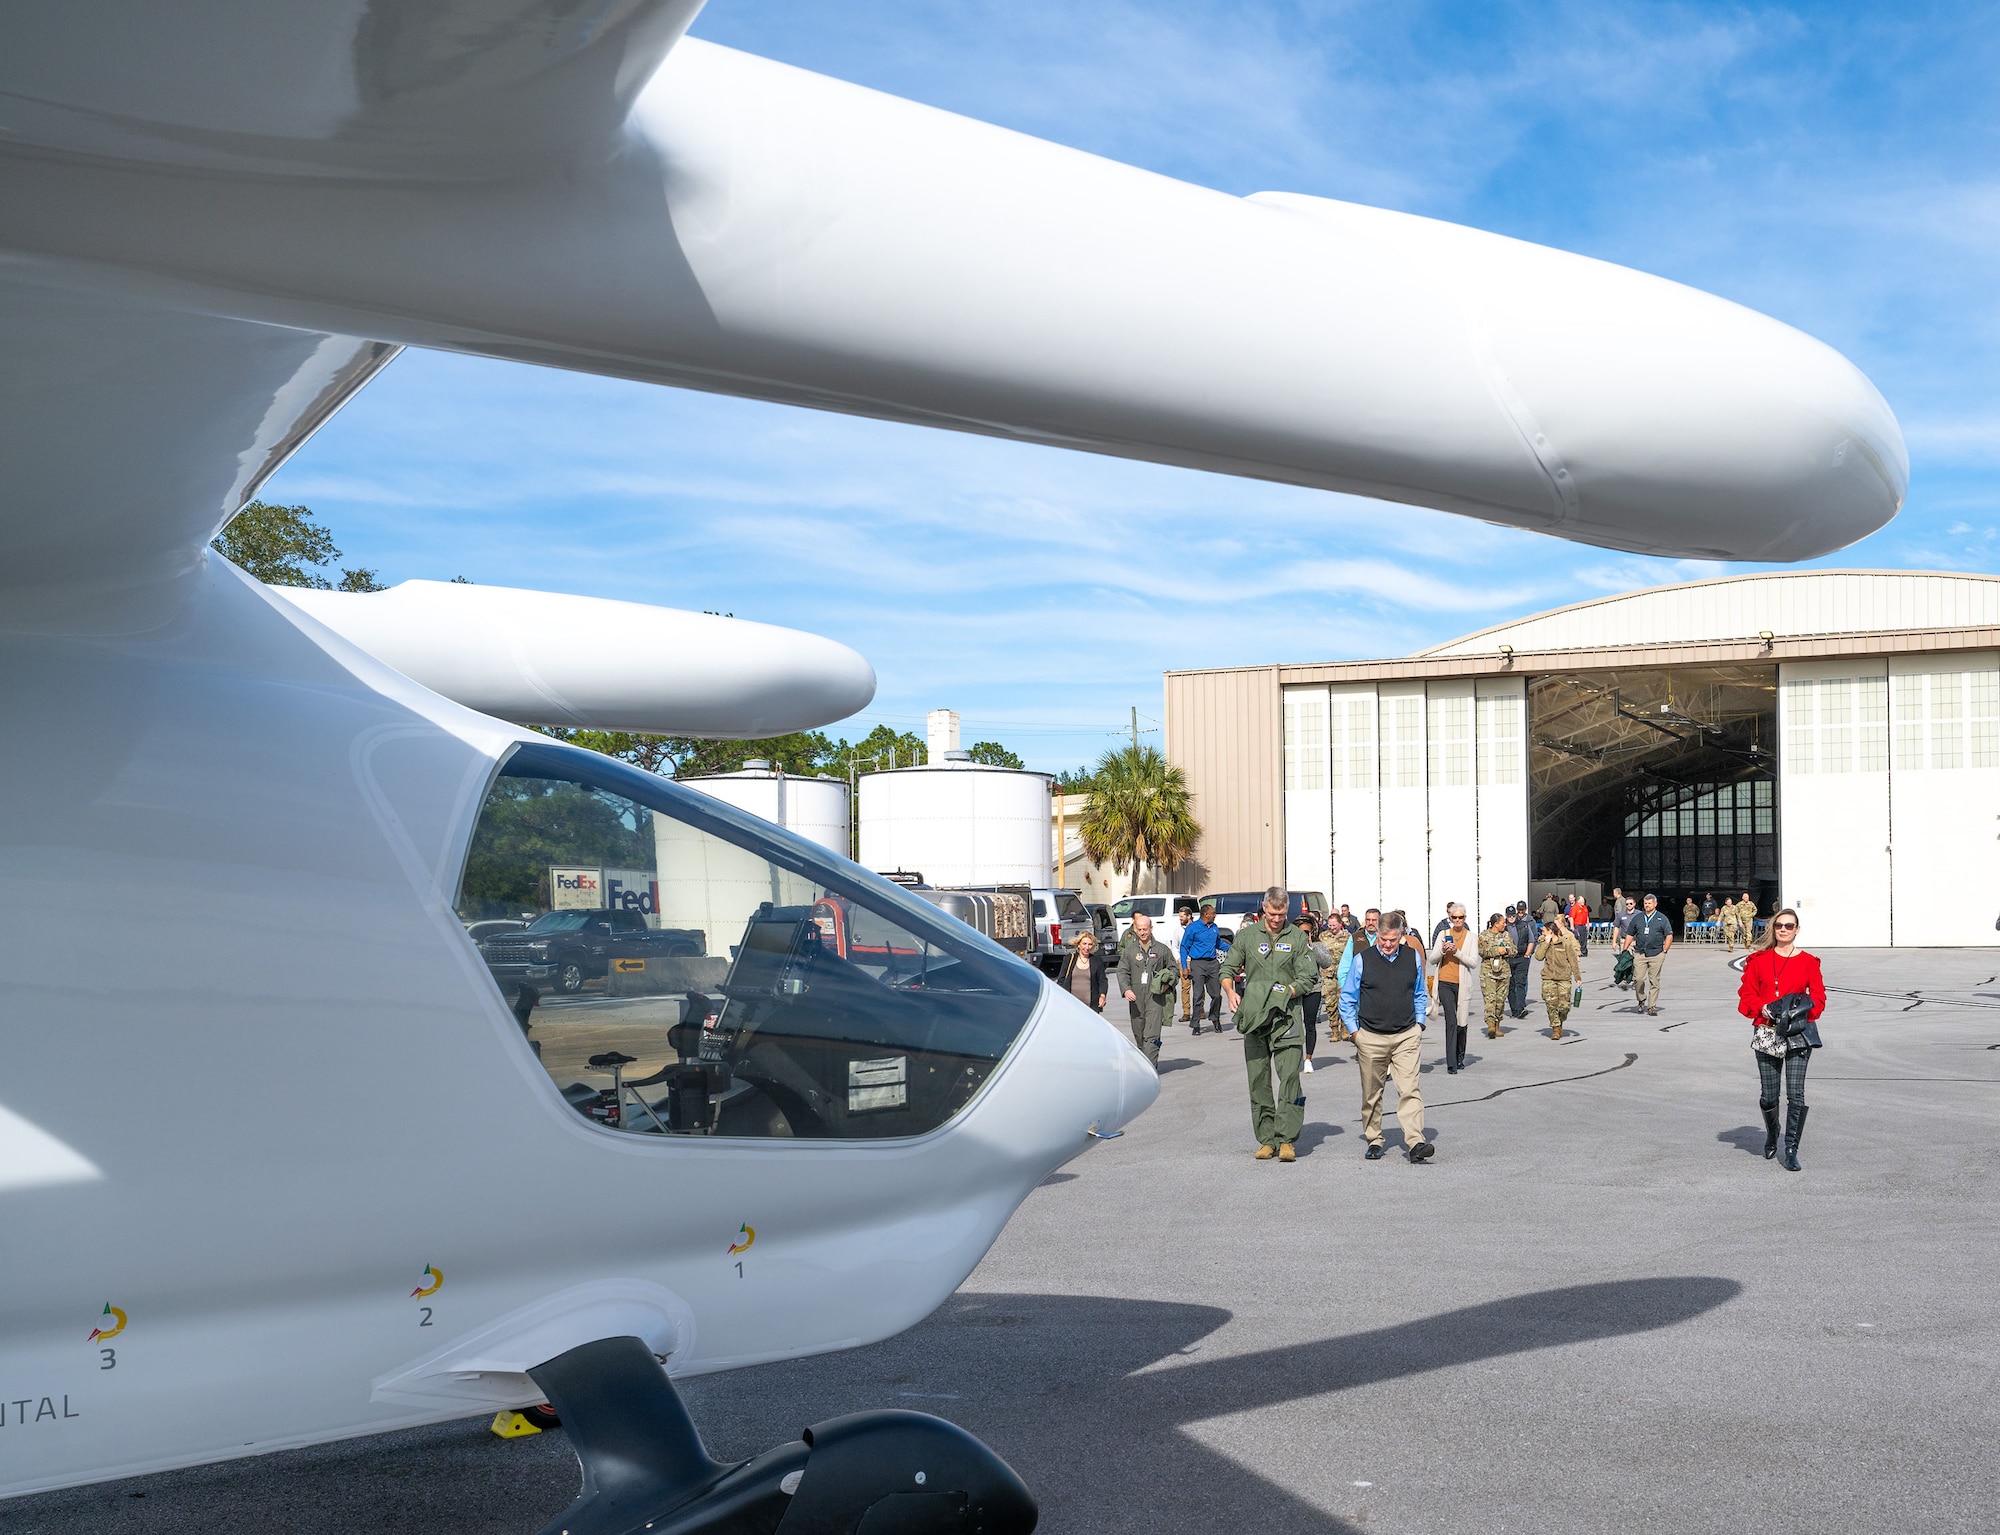 A group of people walk towards an electric aircraft on the flight line.